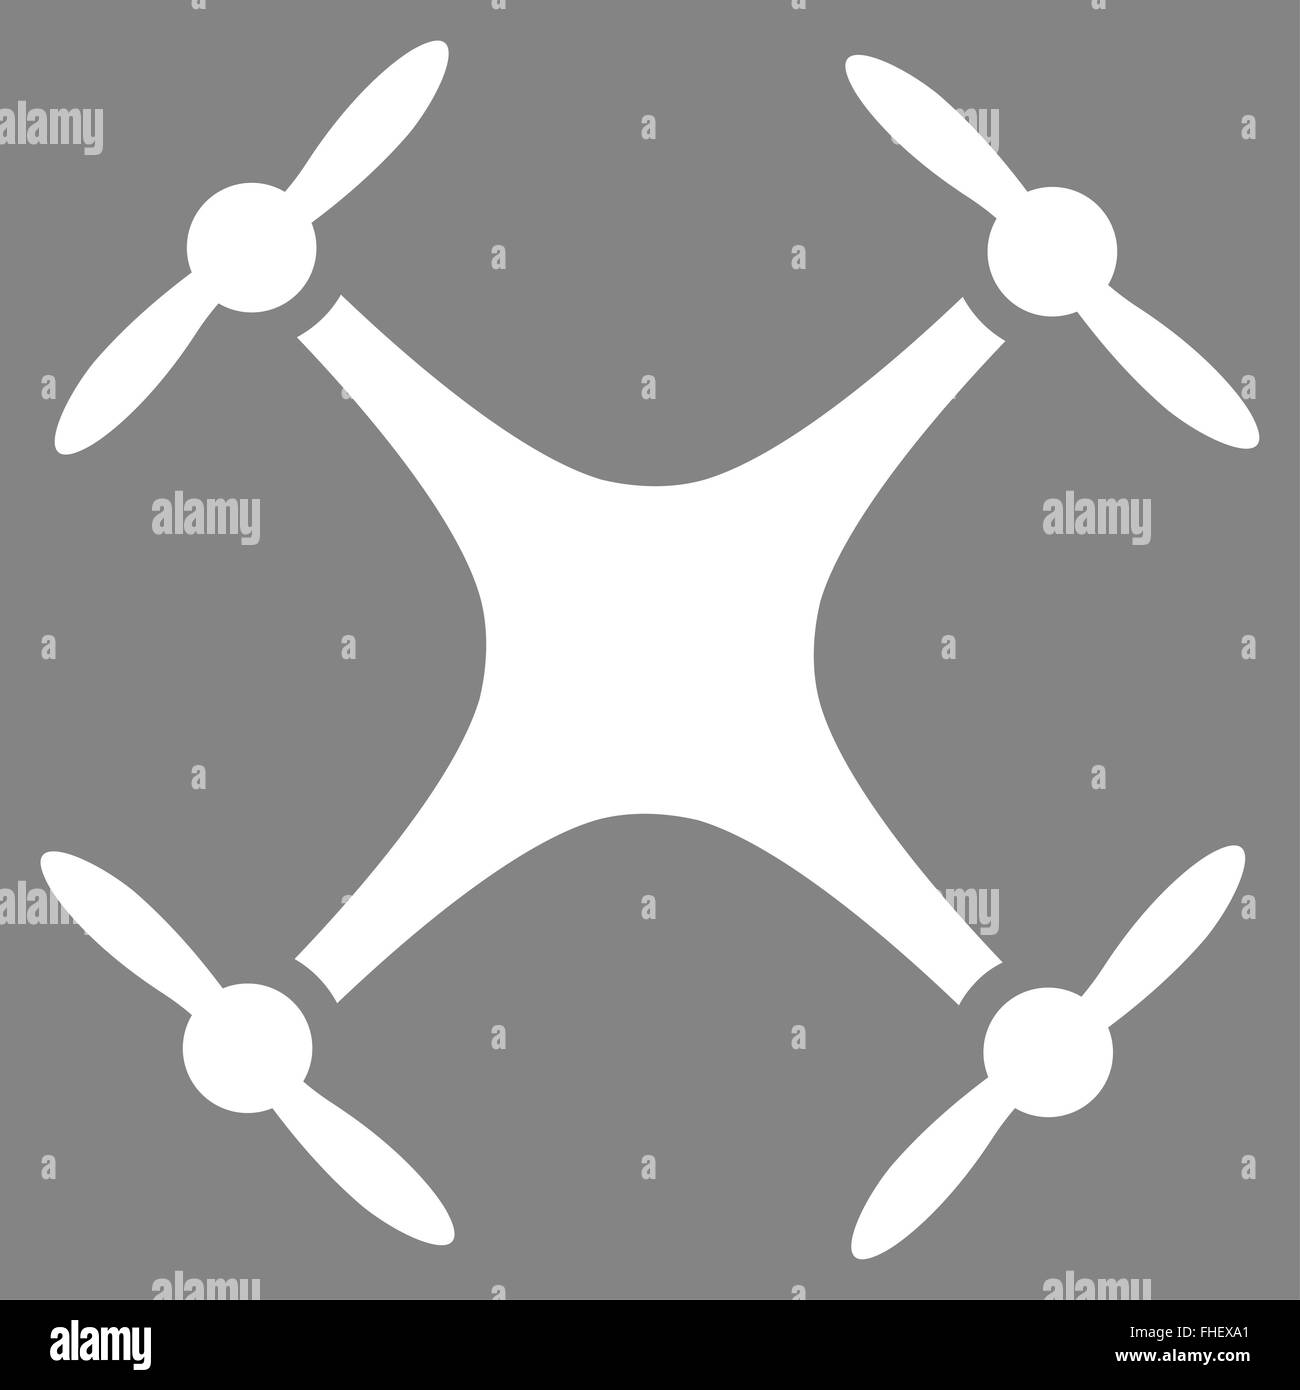 Quadcopter icon from Business Bicolor Set Stock Photo